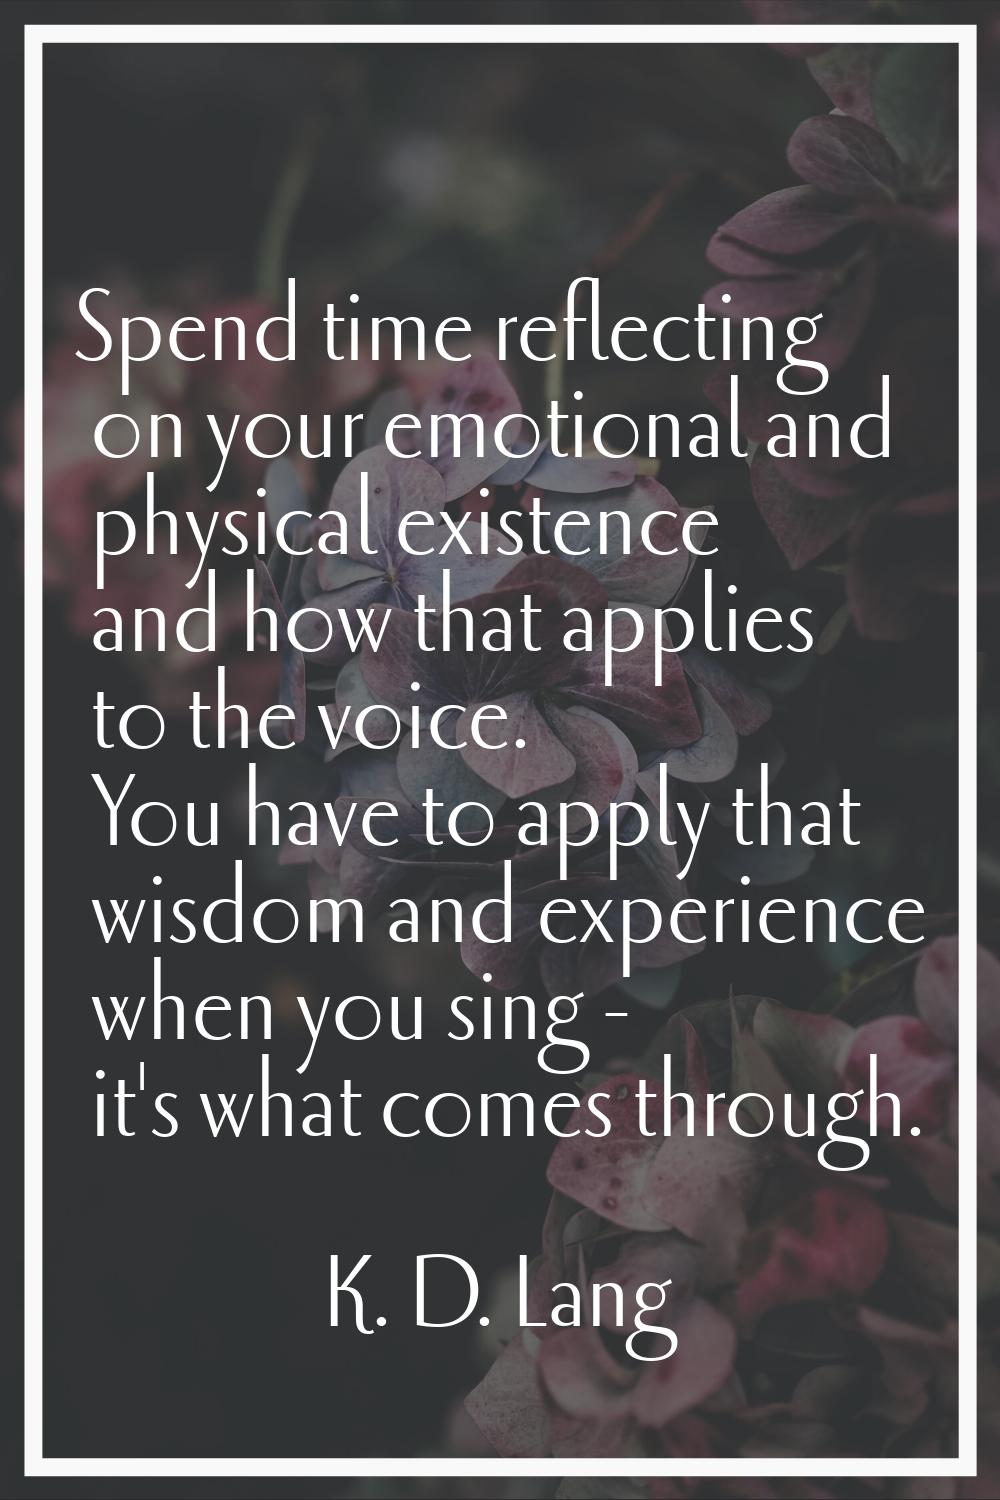 Spend time reflecting on your emotional and physical existence and how that applies to the voice. Y